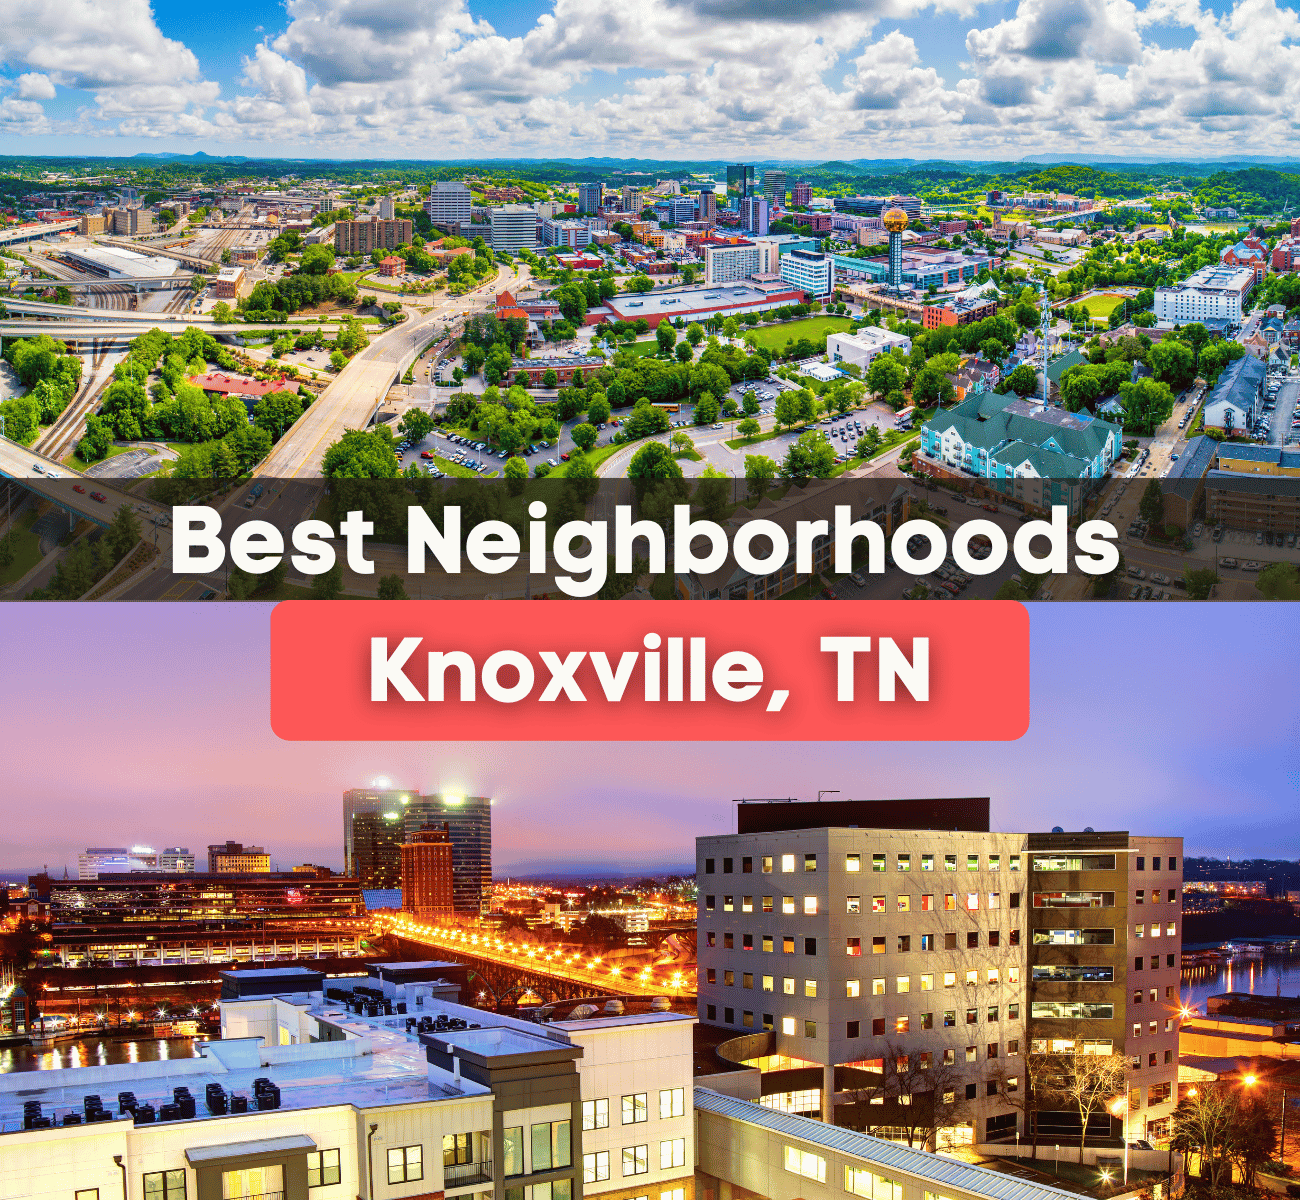 best neighborhoods in Knoxville, TN graphic - Knoxville city view at night and during the day